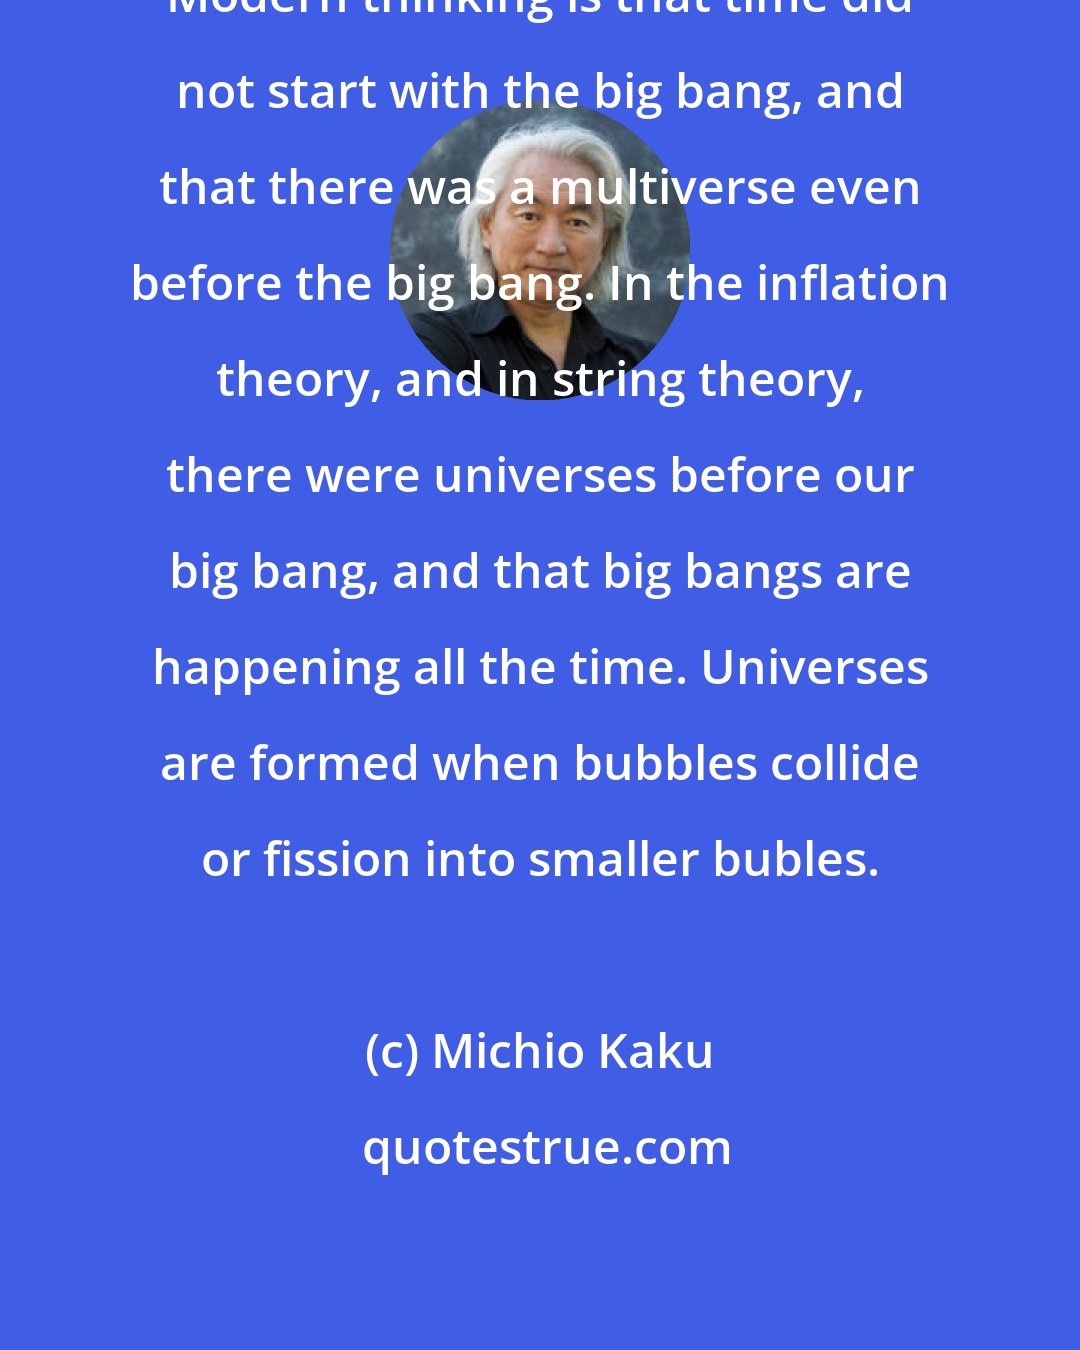 Michio Kaku: Modern thinking is that time did not start with the big bang, and that there was a multiverse even before the big bang. In the inflation theory, and in string theory, there were universes before our big bang, and that big bangs are happening all the time. Universes are formed when bubbles collide or fission into smaller bubles.